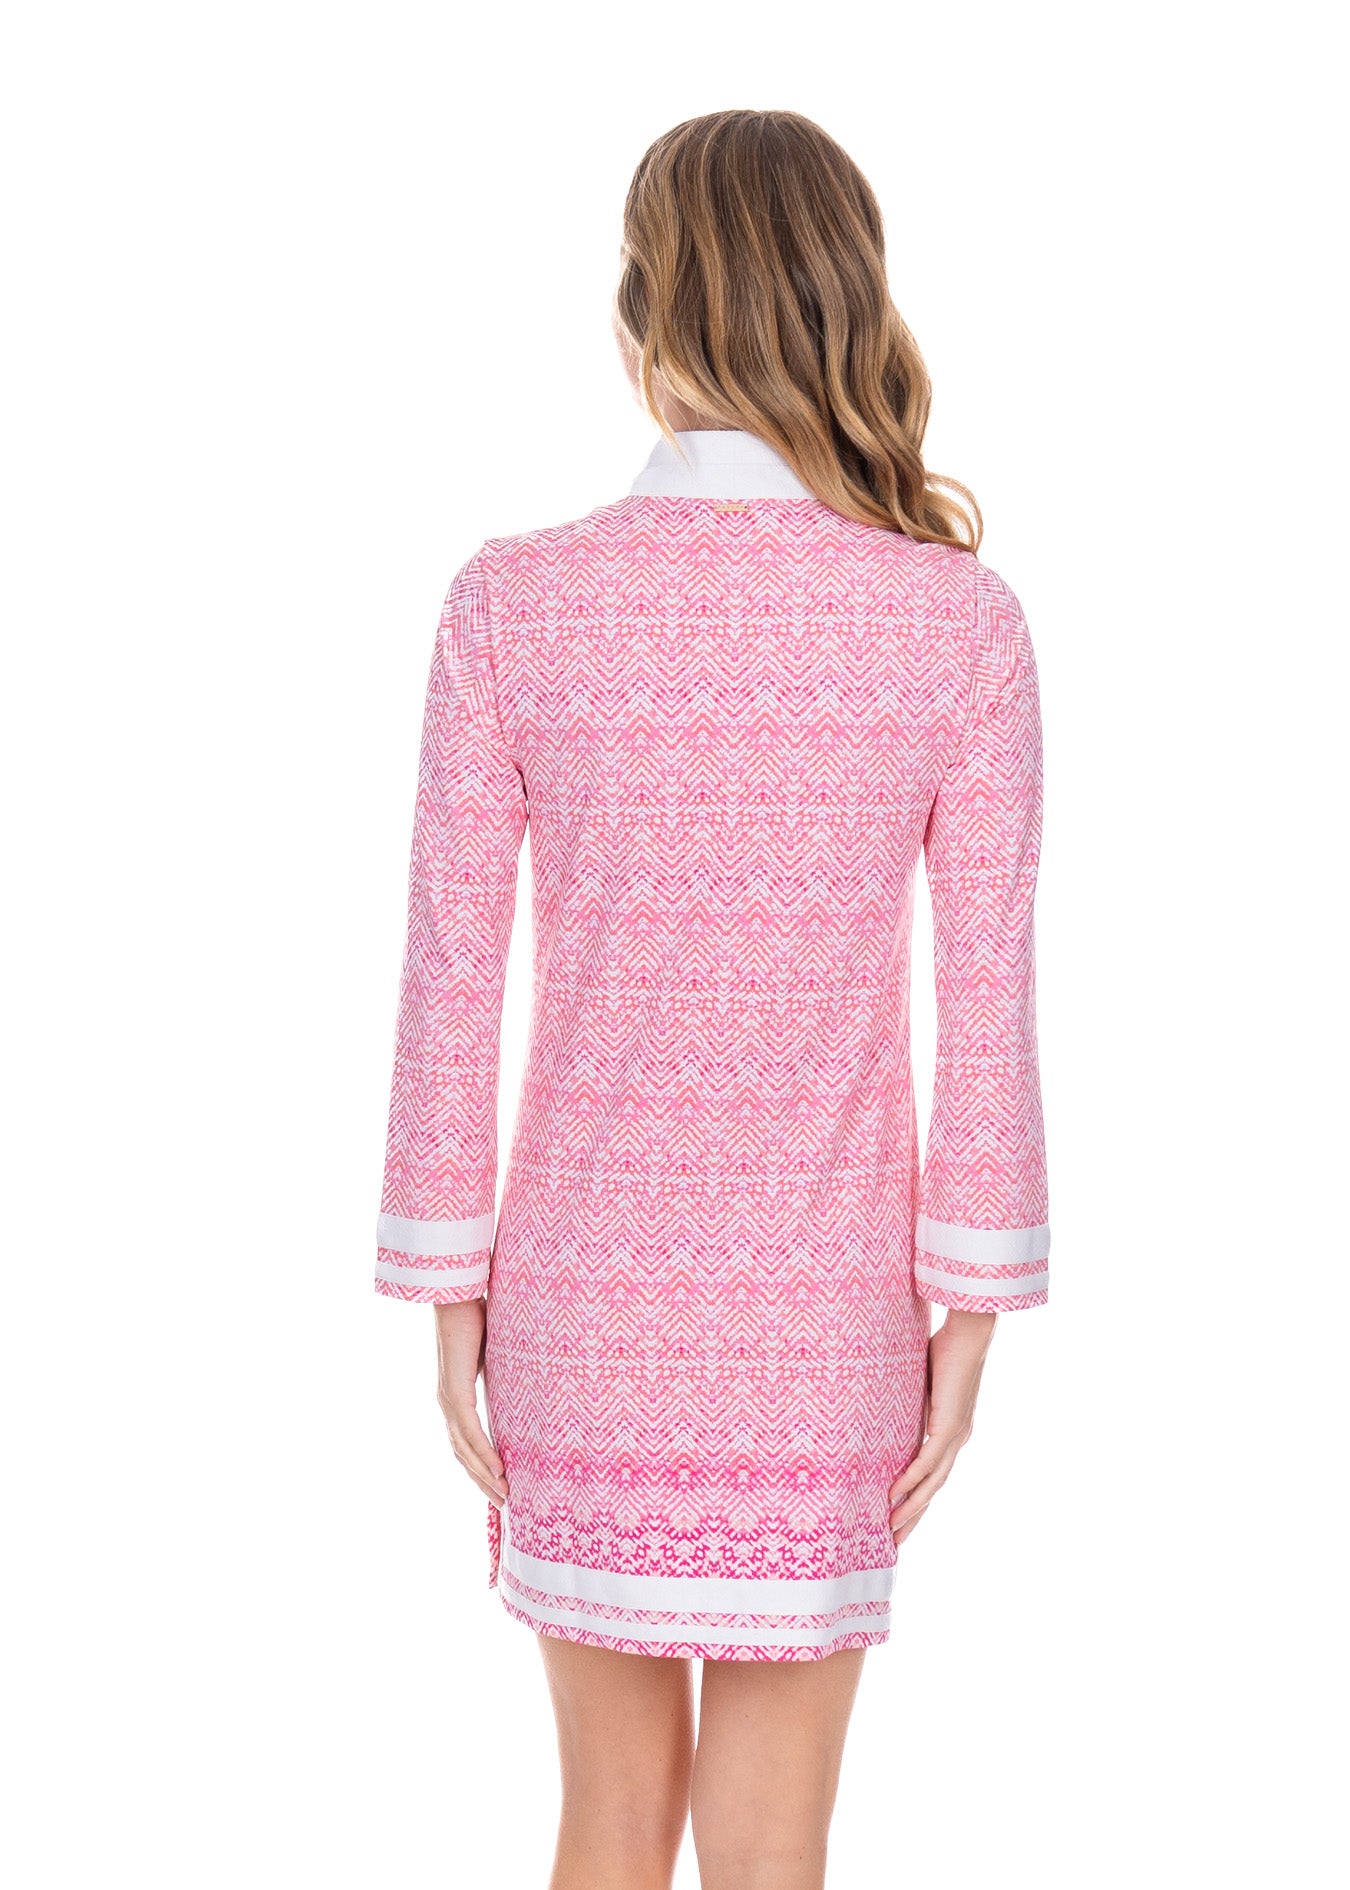 Blonde model facing the back while wearing the Algarve Tunic Dress.